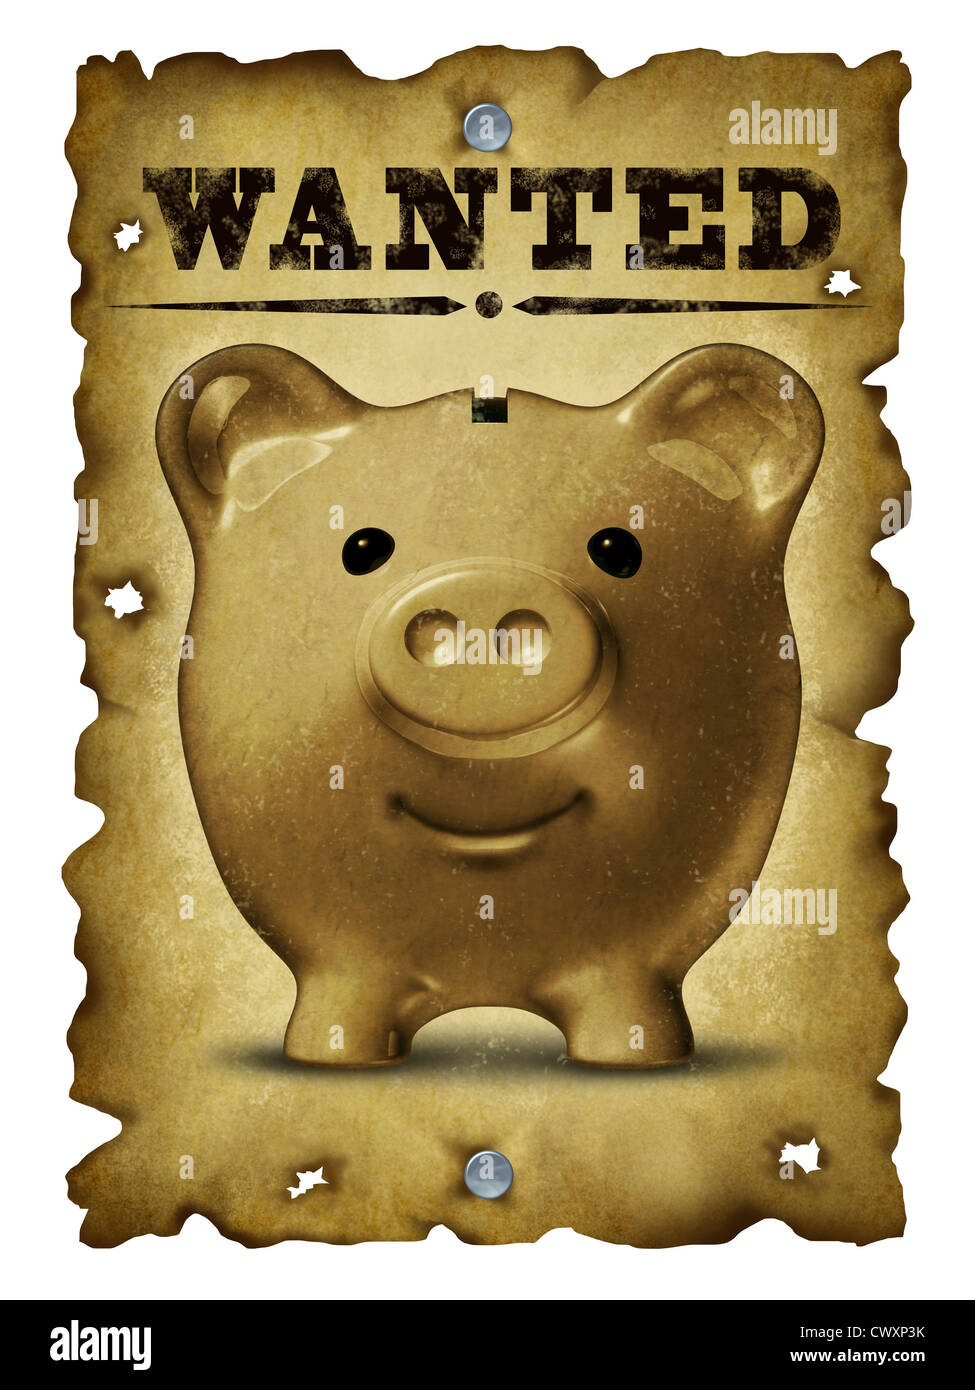 Savings and finance concept with an old grunge western wanted poster with bullet holes and a portrait of a vintage piggy bank as a symbol of home finances and searching for financial sucess. Stock Photo